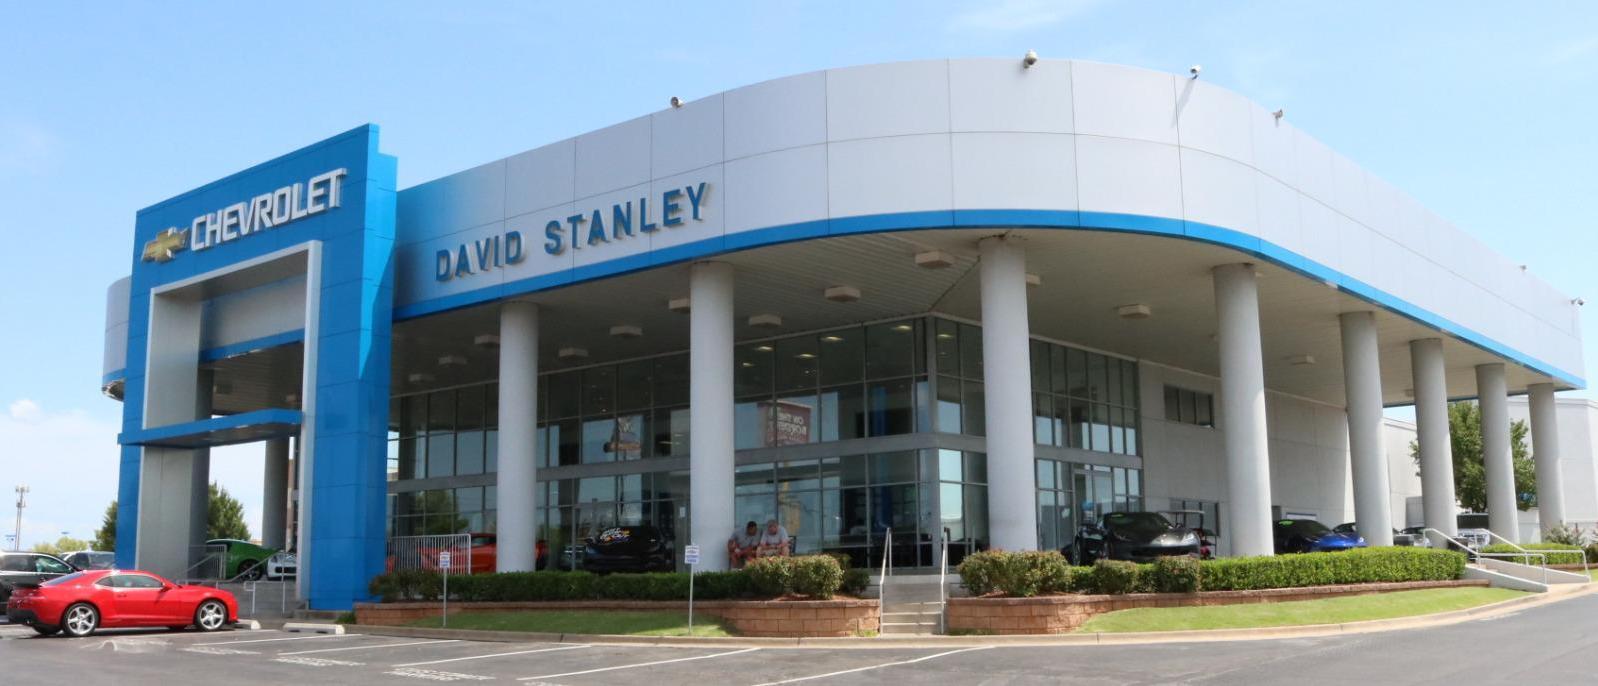 Hours & Directions | David Stanley Chevrolet in Oklahoma City